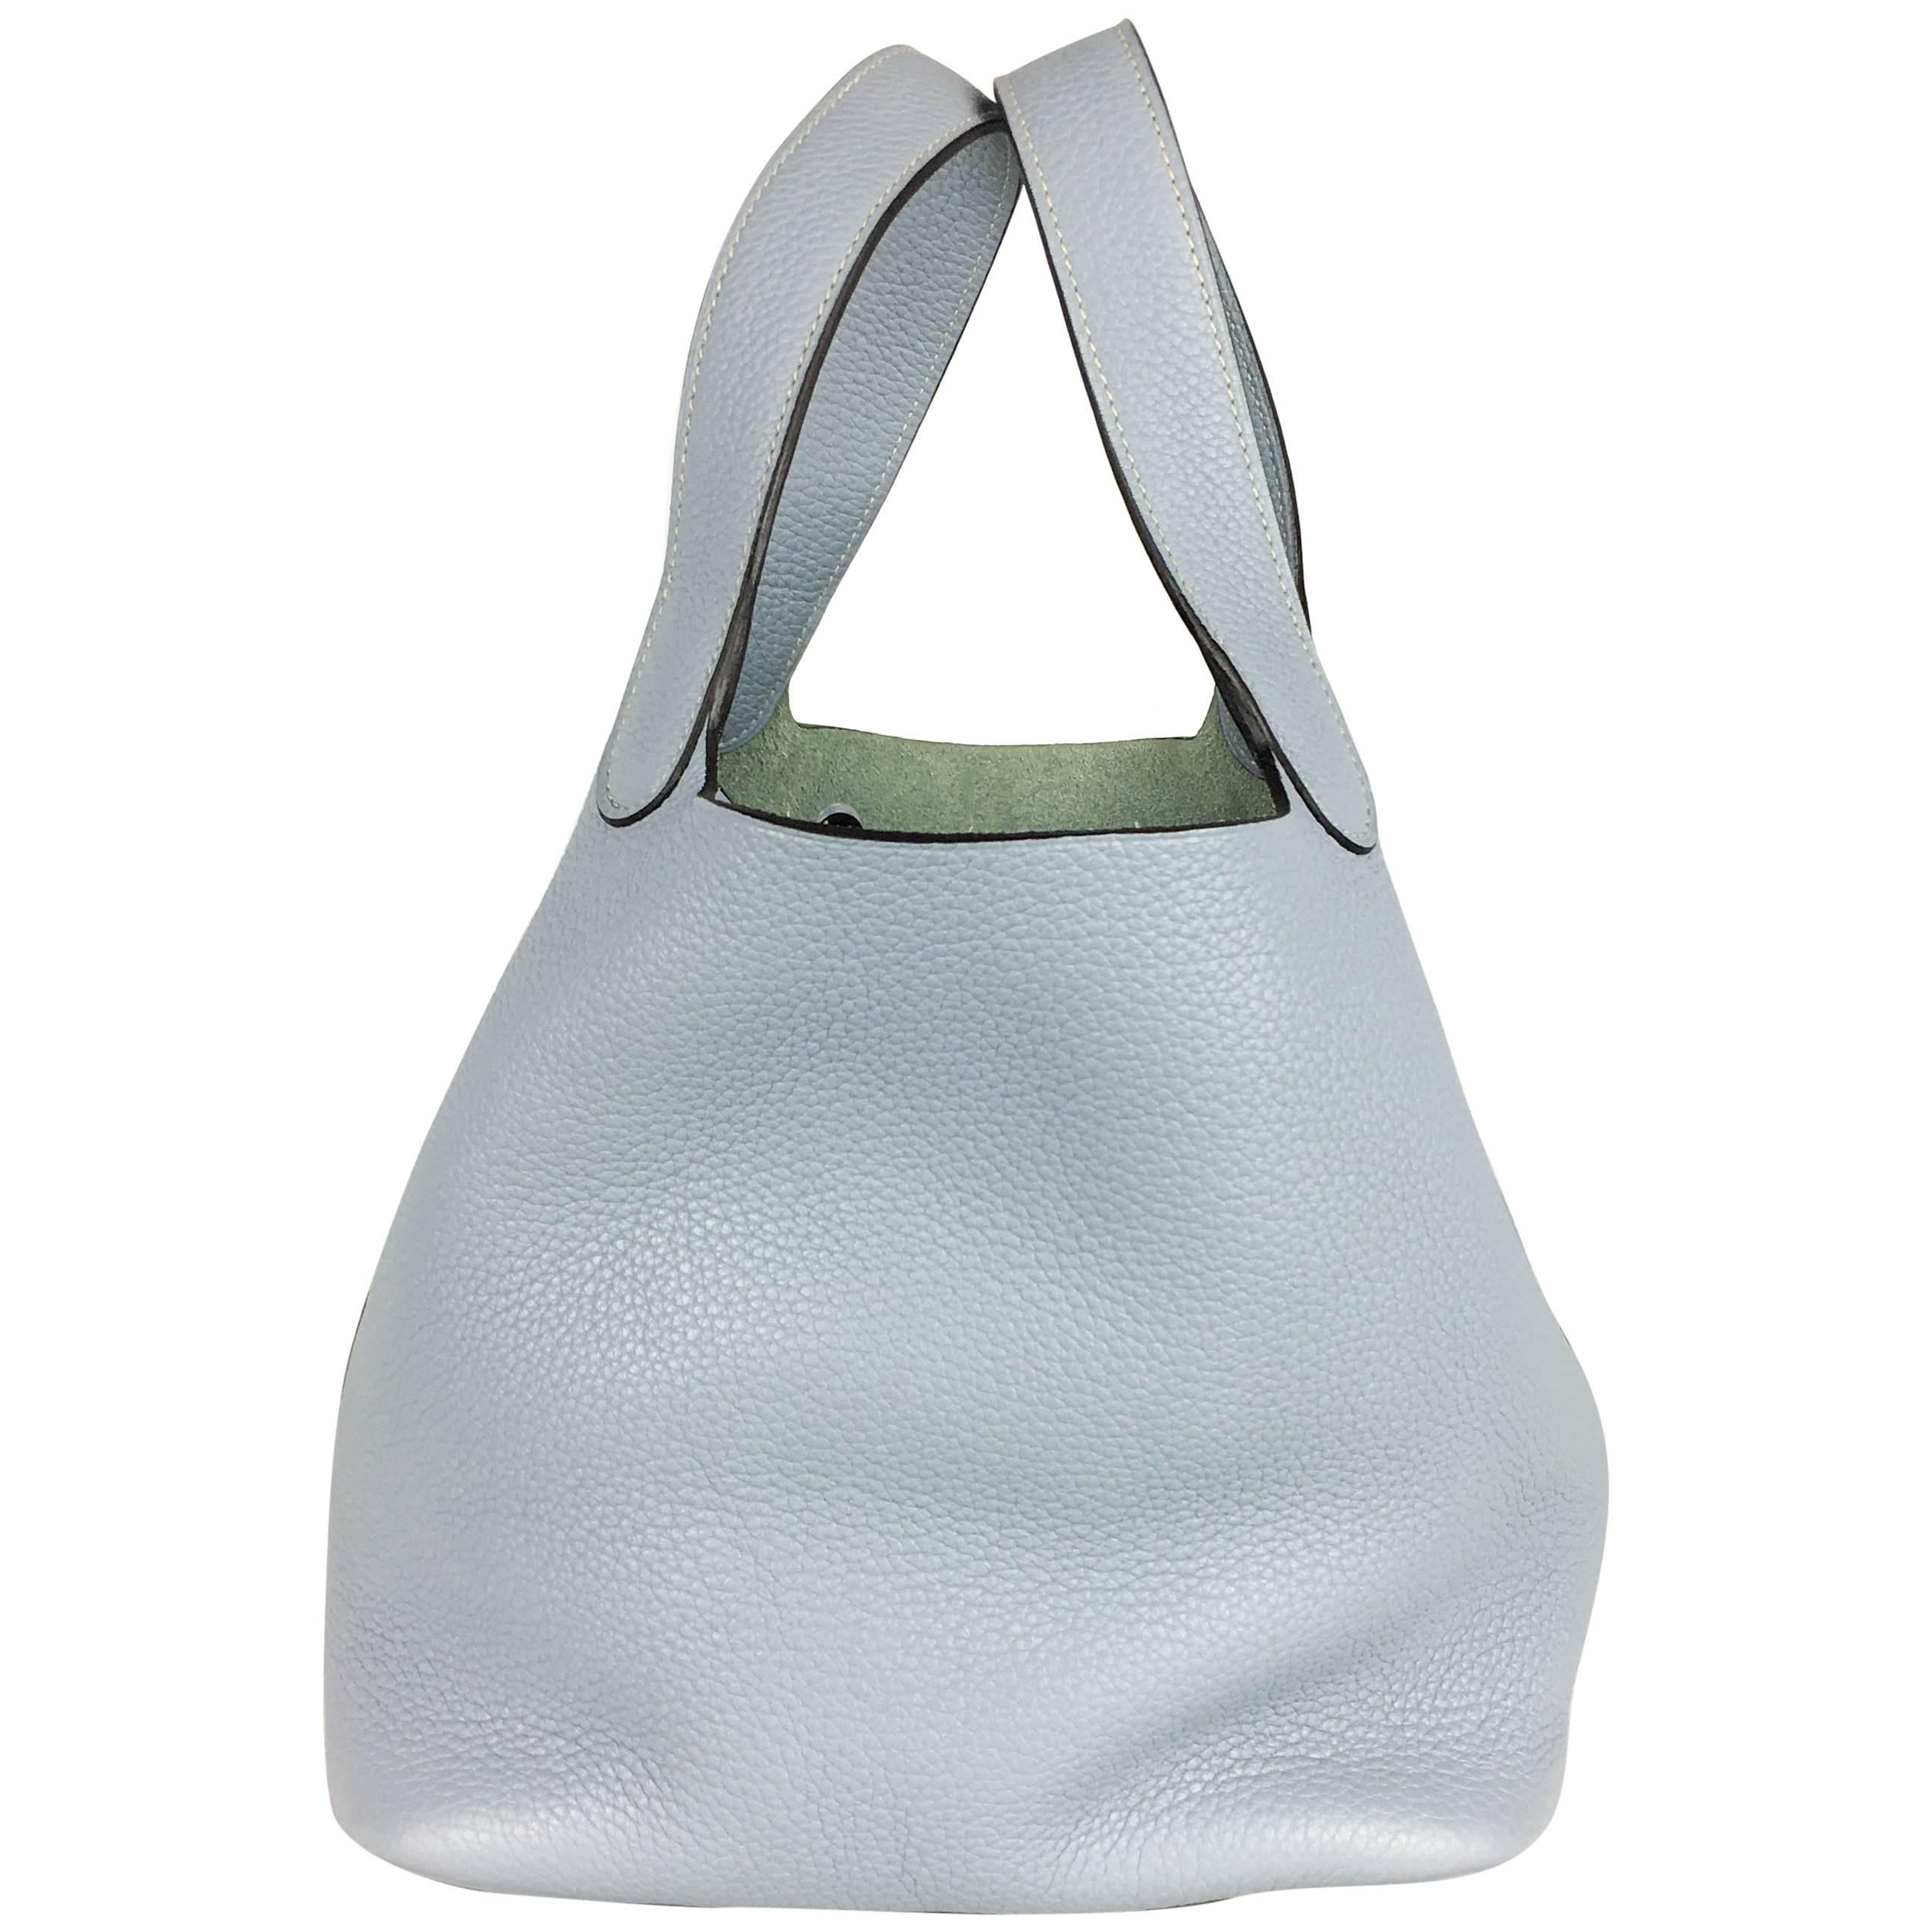 2014 Hermes Picotin 22 Handbag in Pale Blue Clemence Leather For Sale